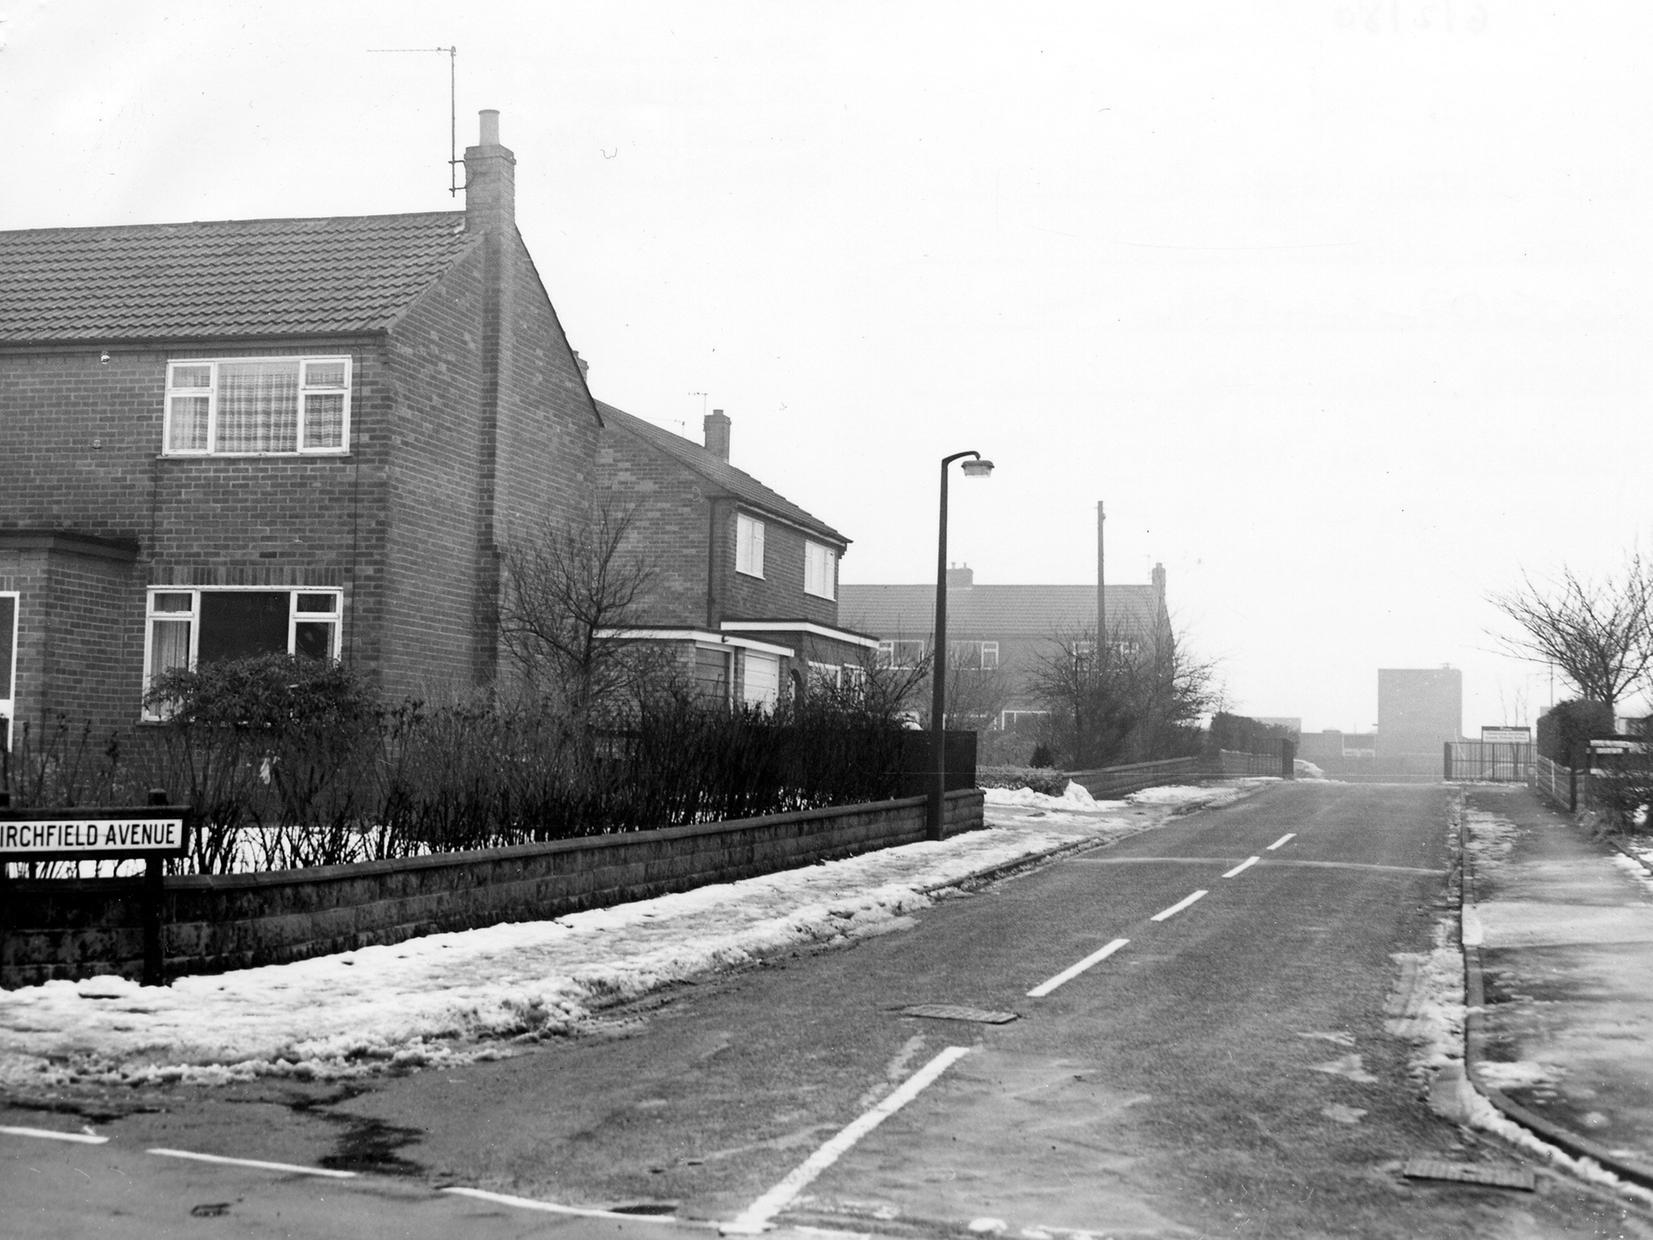 Street Lane at the junction with Birchfield Avenue.